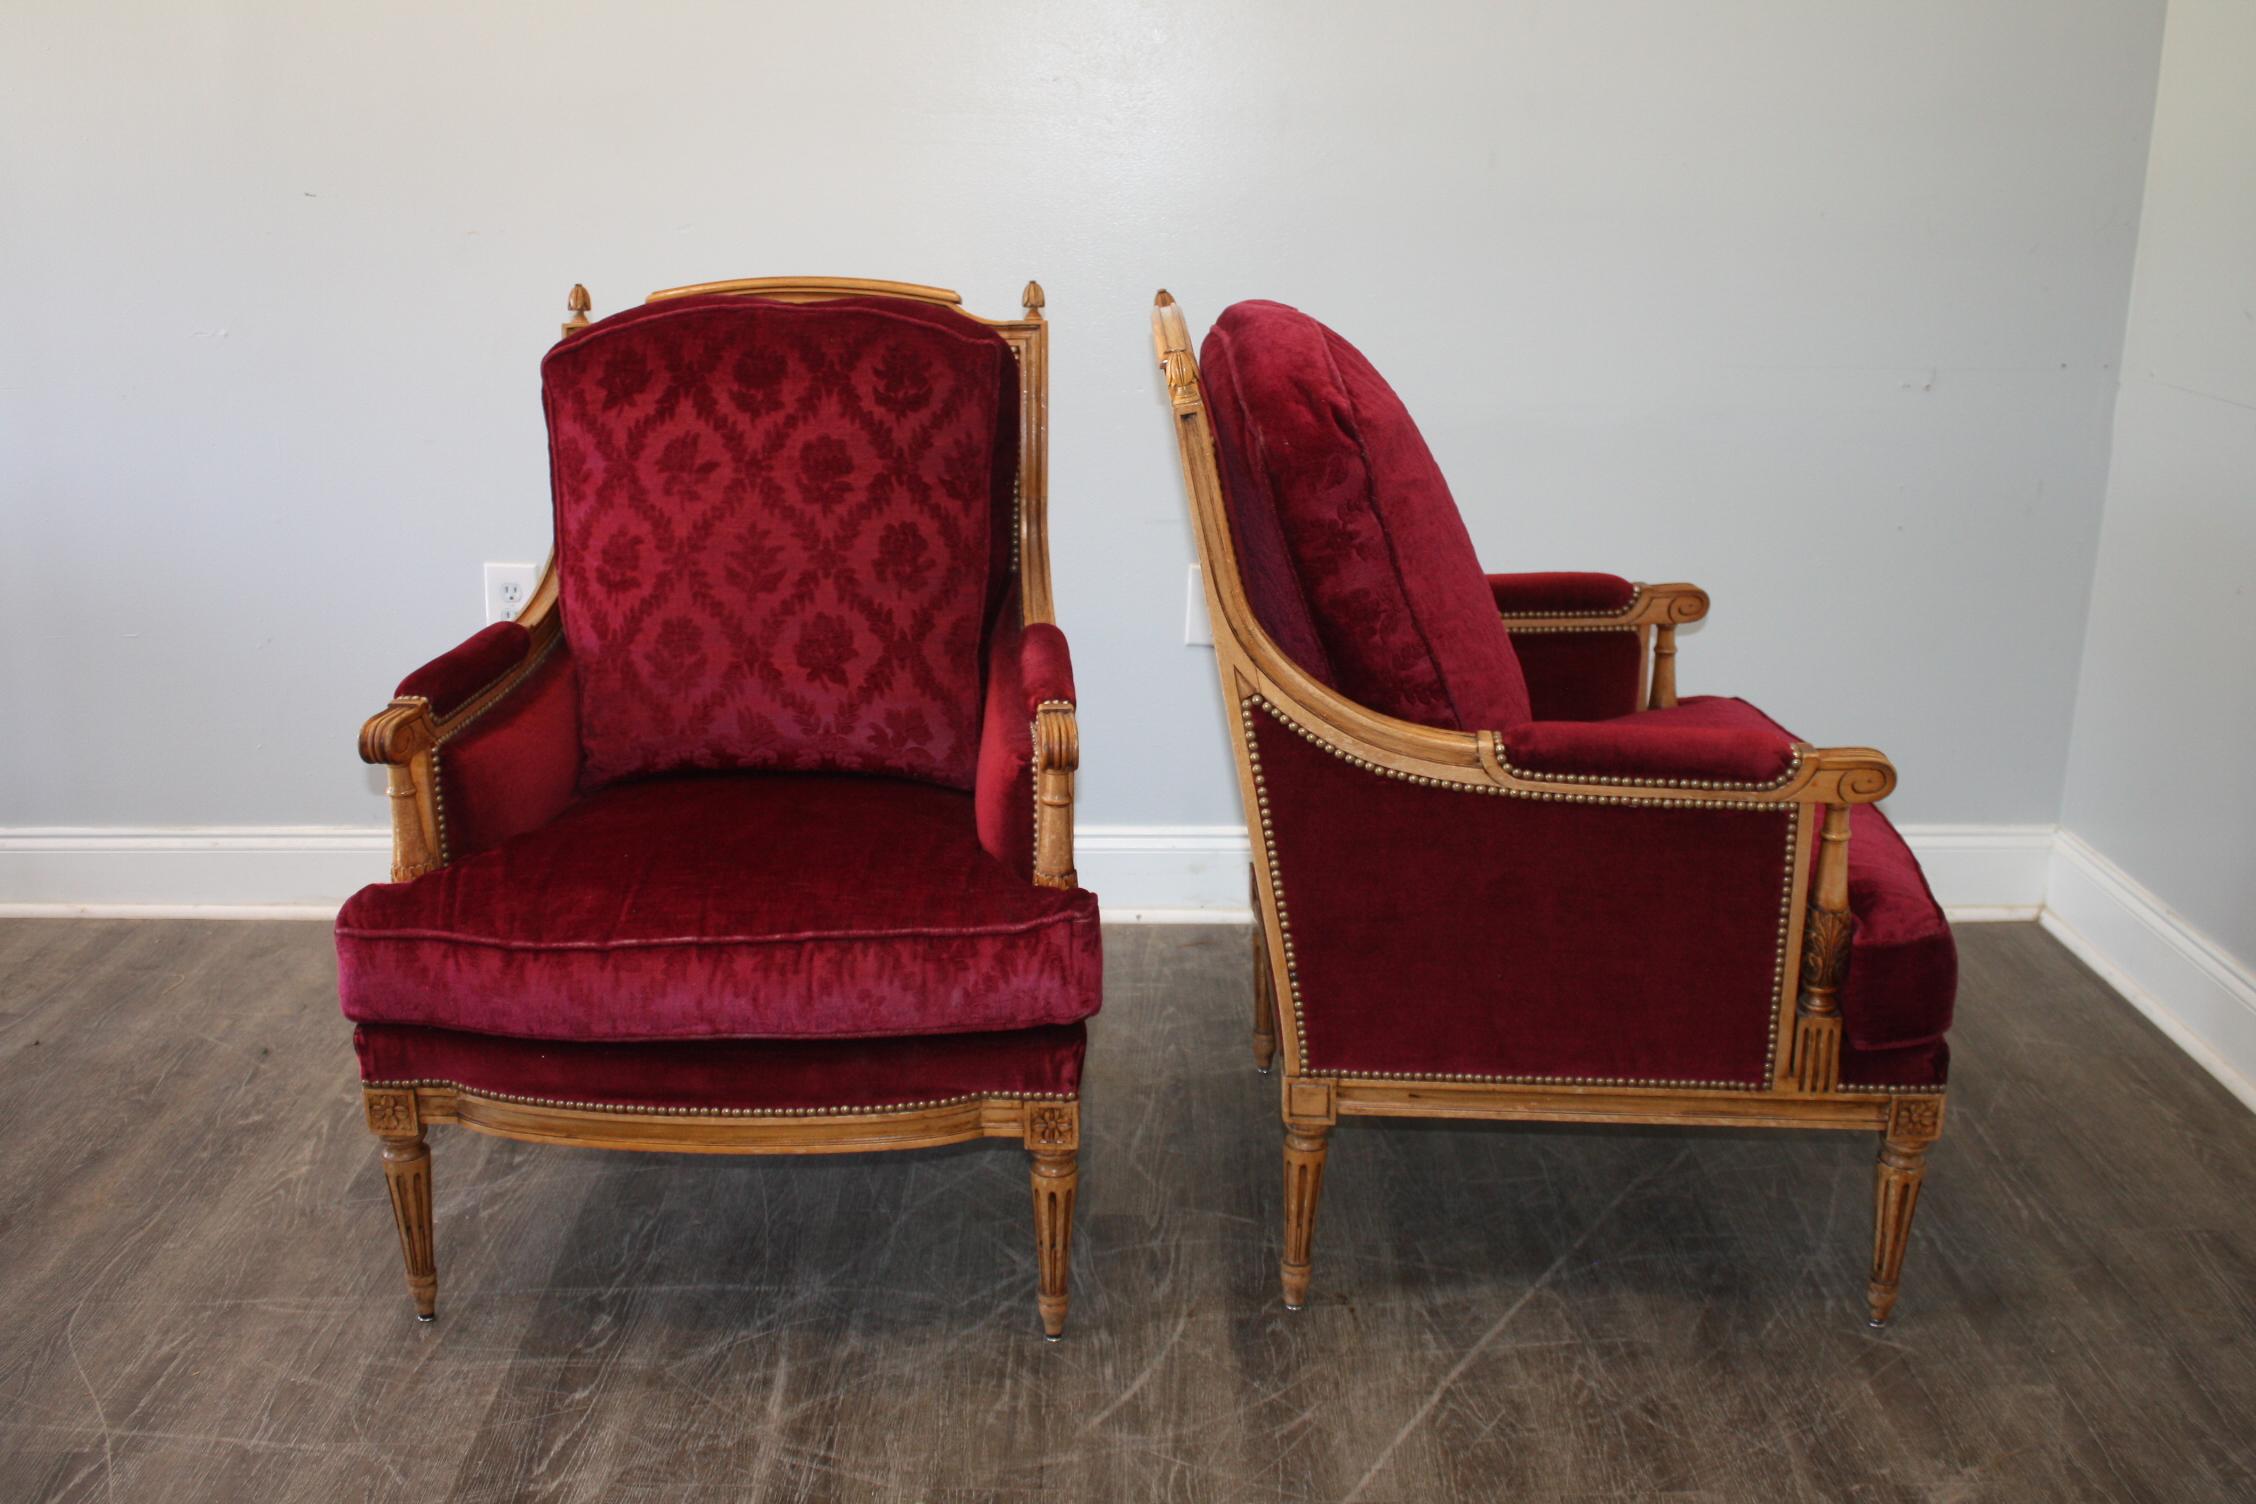 French Louis XVI Style Bergere Chairs In Good Condition For Sale In Stockbridge, GA